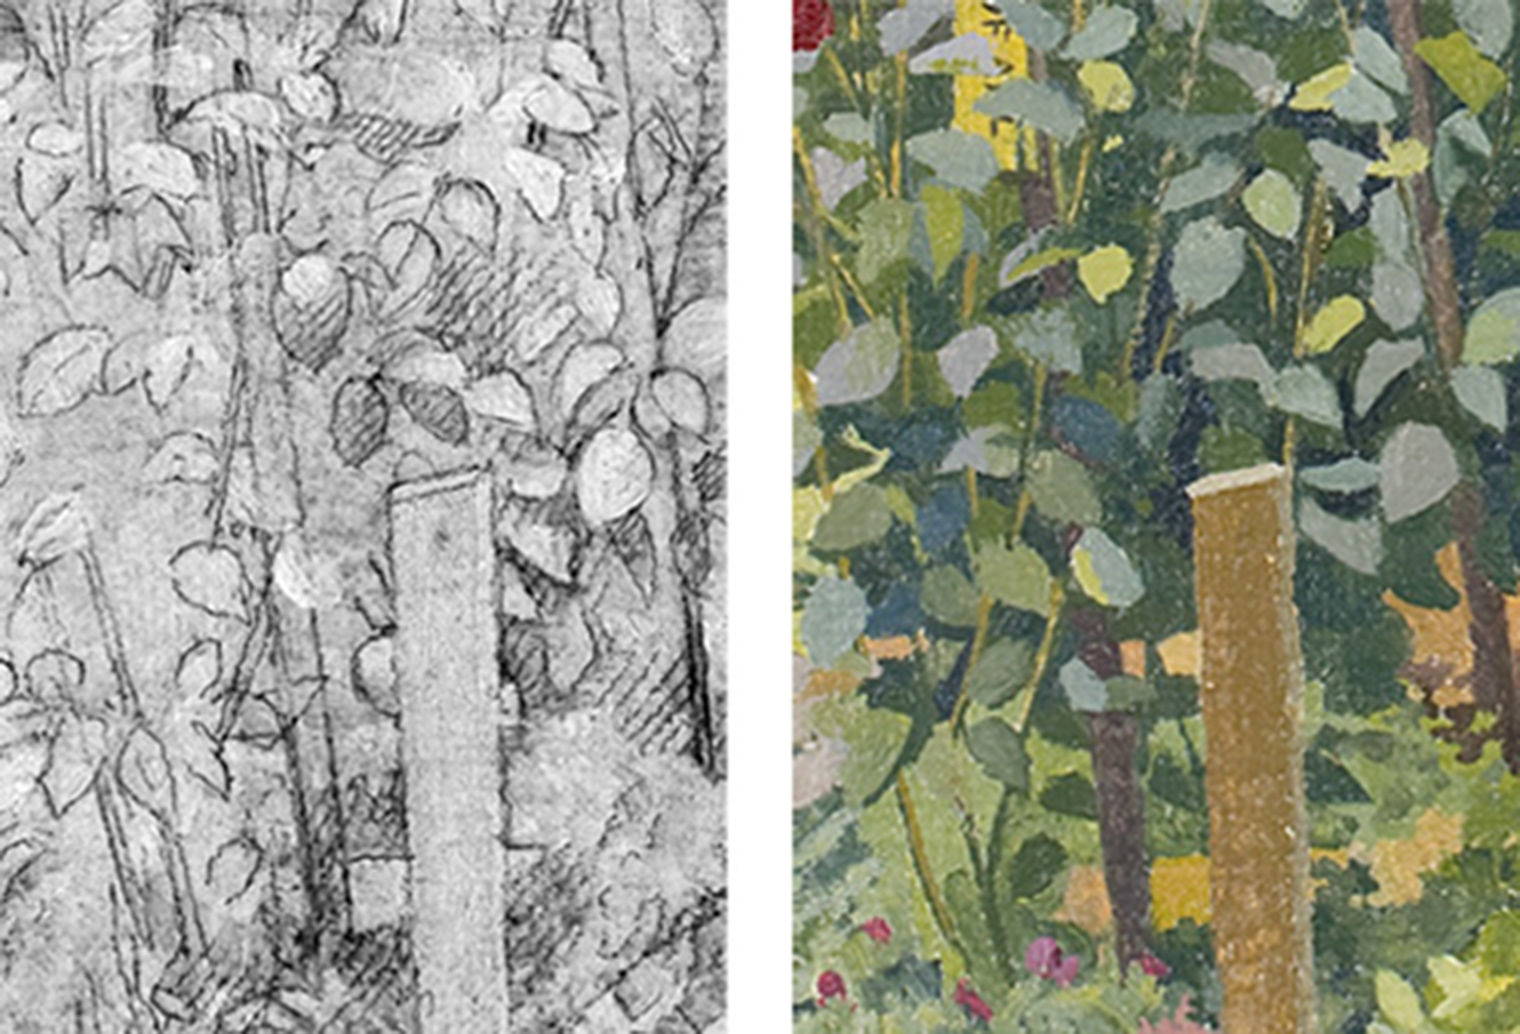 Side-by-side composite image. At left, an infrared image of a detail of Stanley Spencer’s painting titled King’s Cookham Rise. At right, Detail of Stanley Spencer’s painting titled King’s Cookham Rise depicting a flower garden surrounded by green shrubs photographed in normal light.